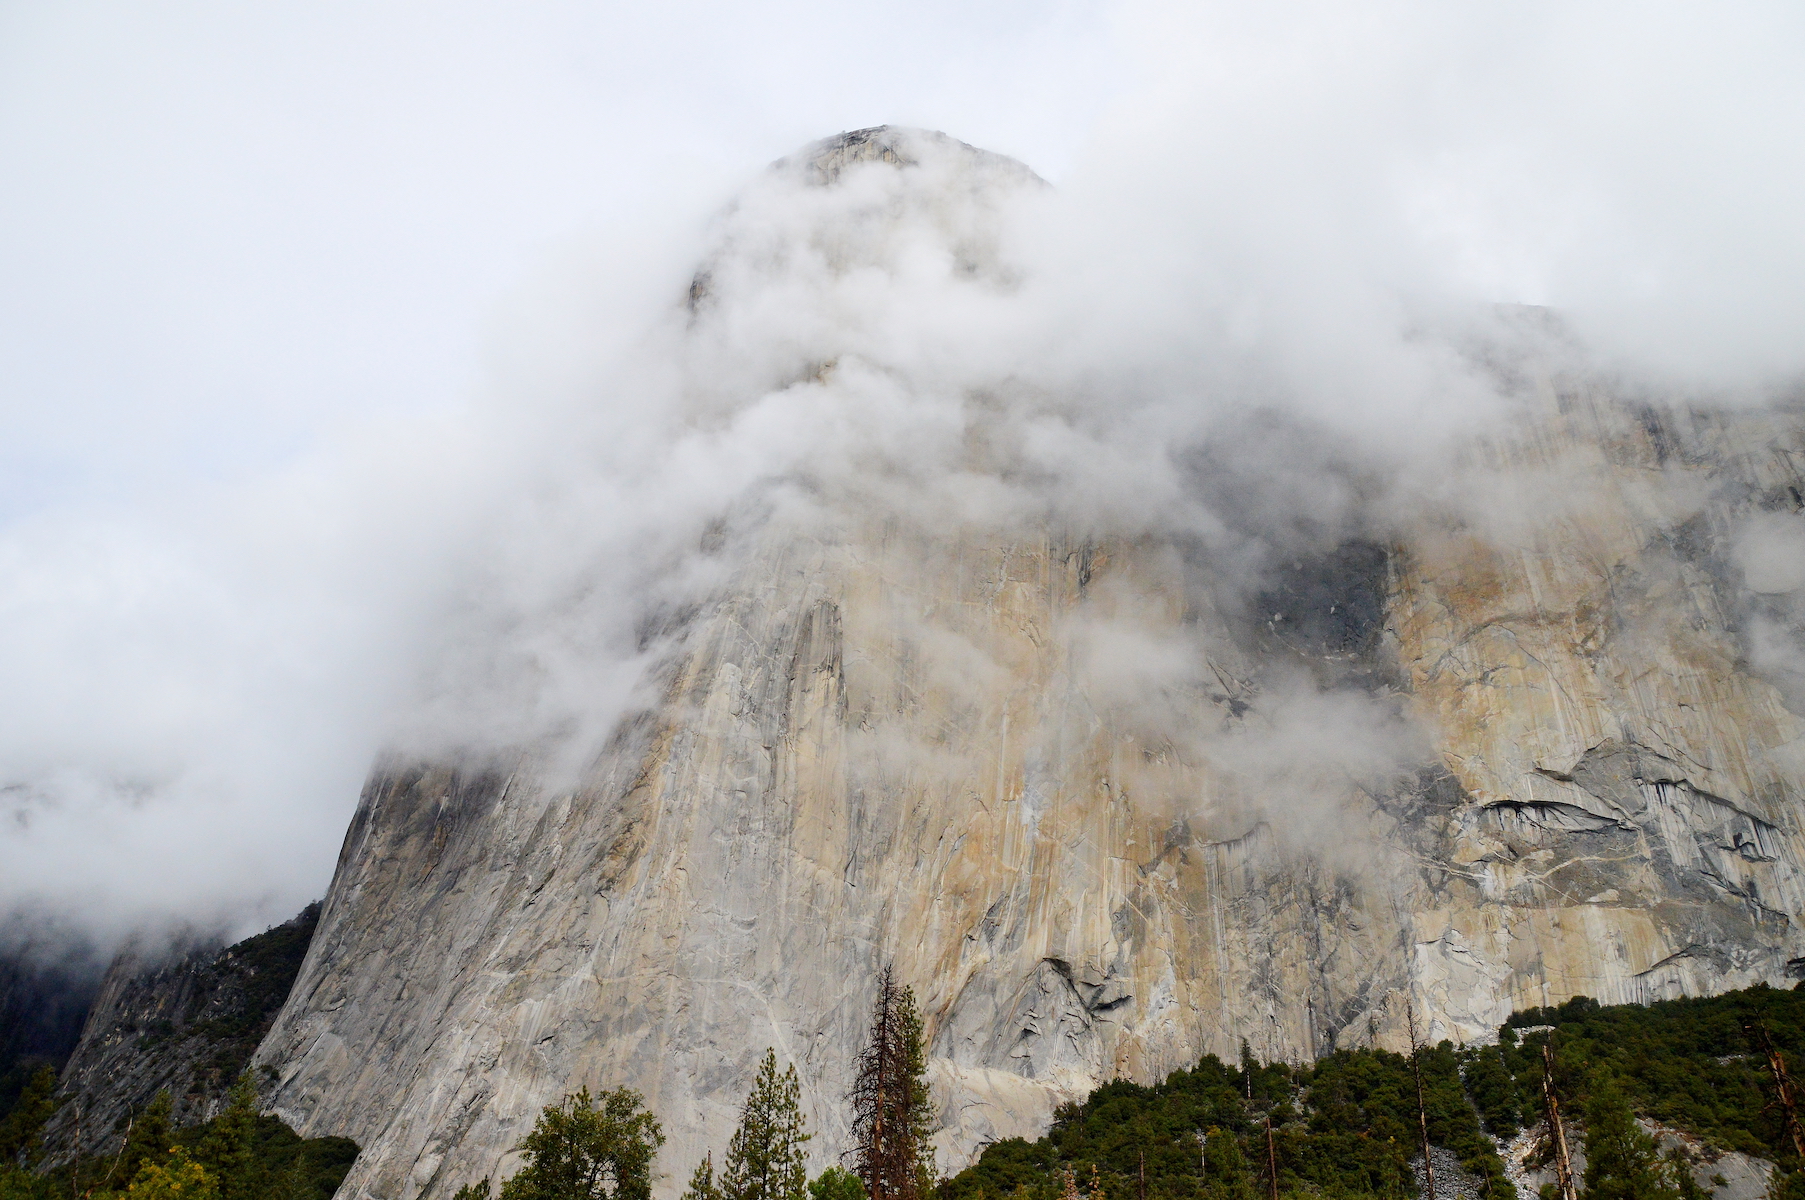 El Capitan (Tu-Tok-A-Nu-La). In his El Cap Report on October 9, 2021, photographer Tom Evans wrote, The storm arrived at 2:30 a.m. with some scattered showers.... It was raining fairly hard when a large rockfall was heard pounding down, what I think was the Camp 4 wall, at 4:35 a.m.... By the time I got going...the rain was gone and the clouds were clearing off. [Photo] Tom Evans